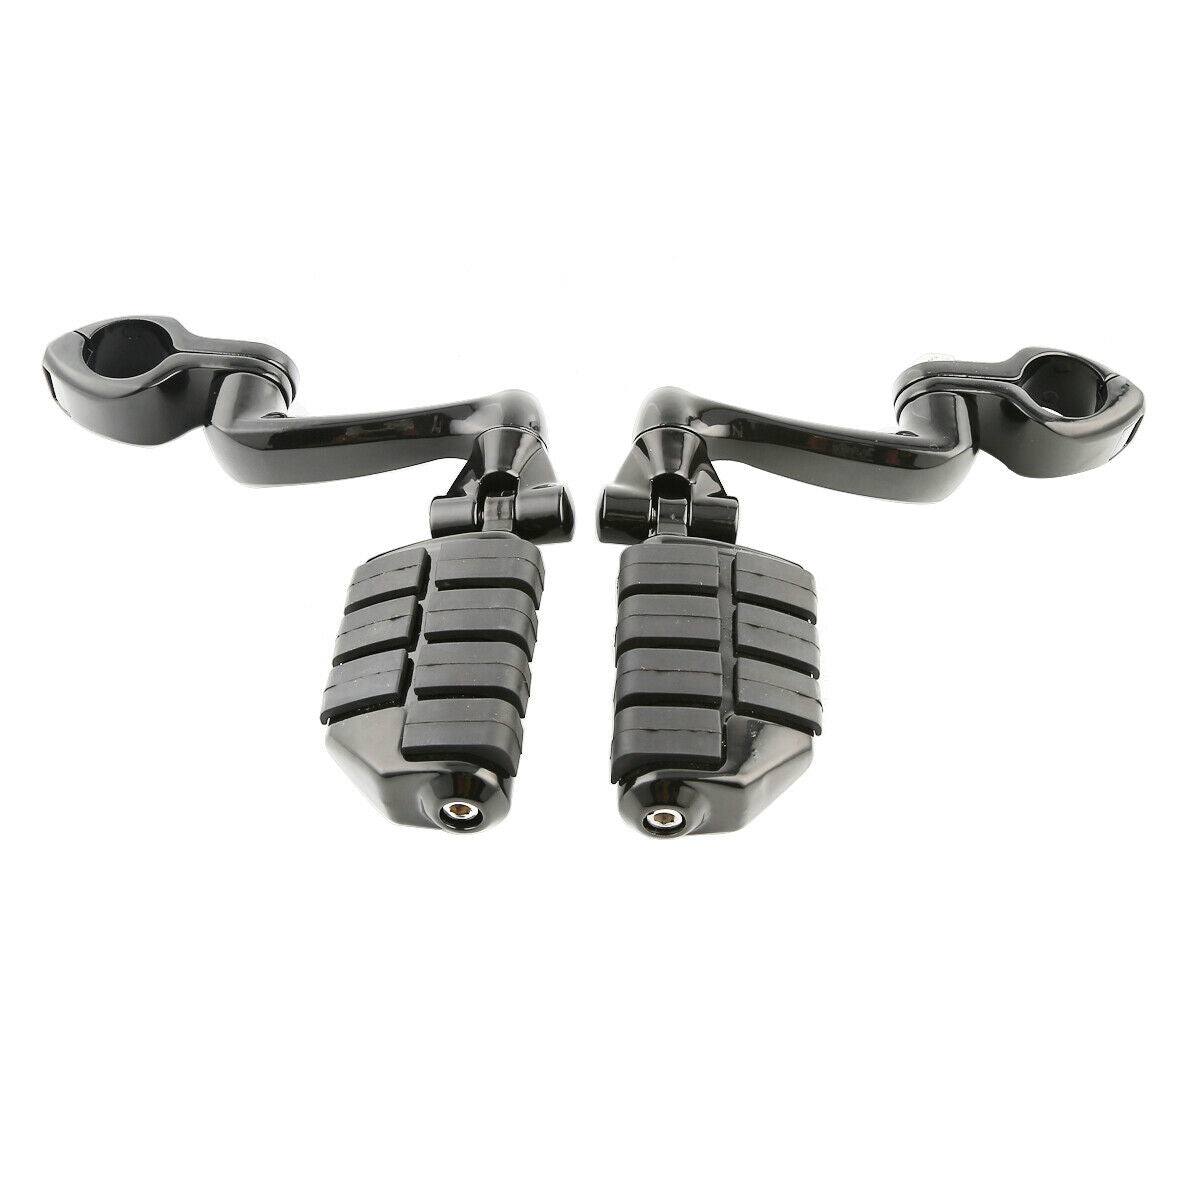 1 1/4" Engine Guard 360 Adjustable Highway Bar Footpeg Pegs Mount Fit For Harley - Moto Life Products